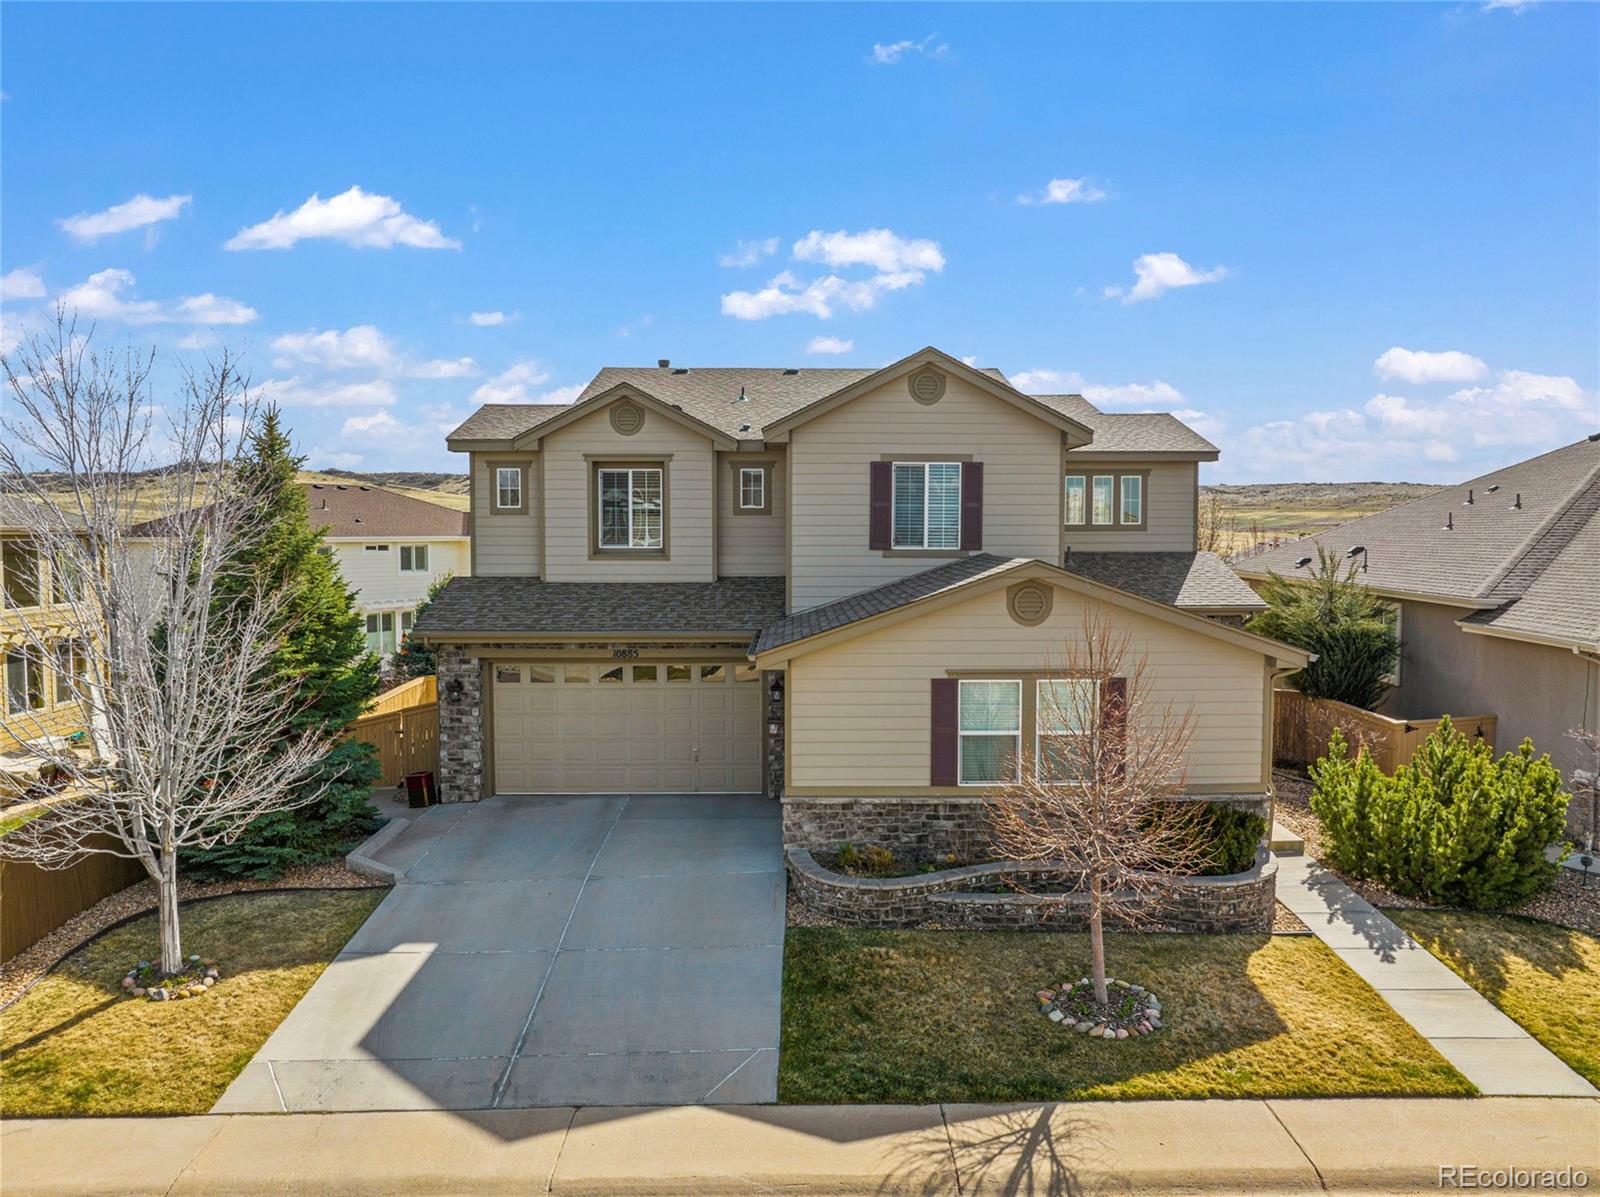 Report Image for 10885  Glengate Circle,Highlands Ranch, Colorado